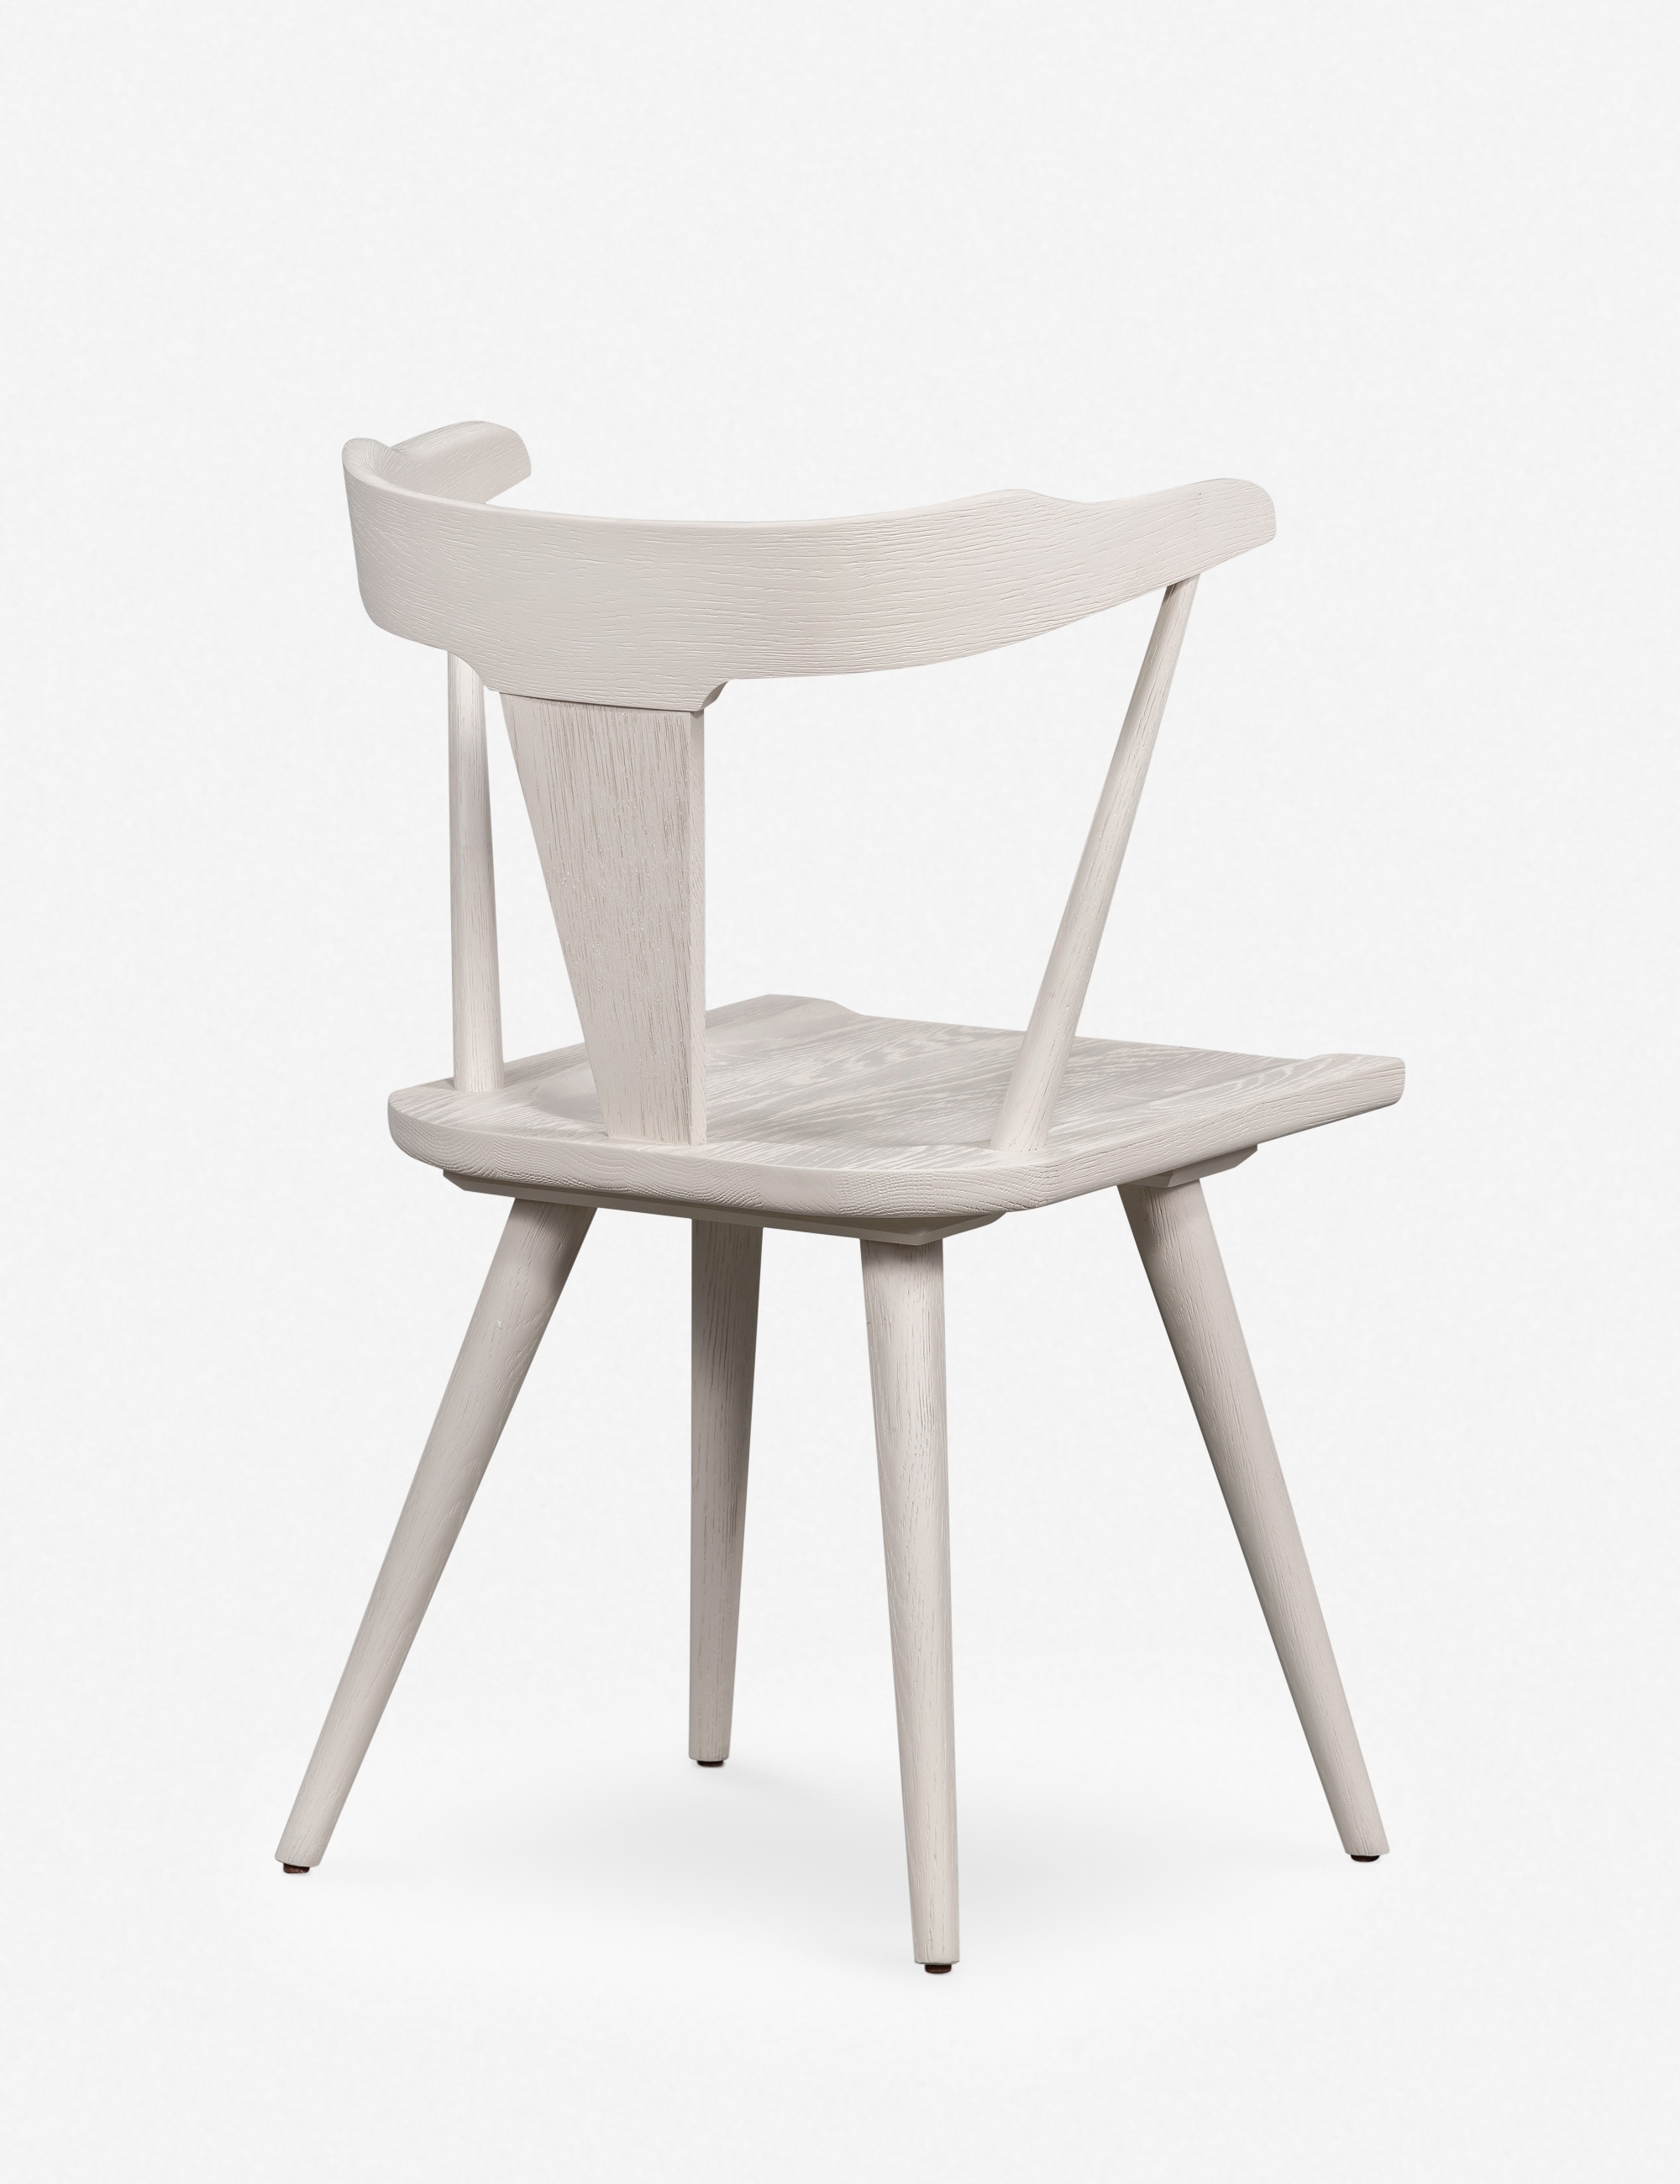 Lawnie Dining Chair - Image 1